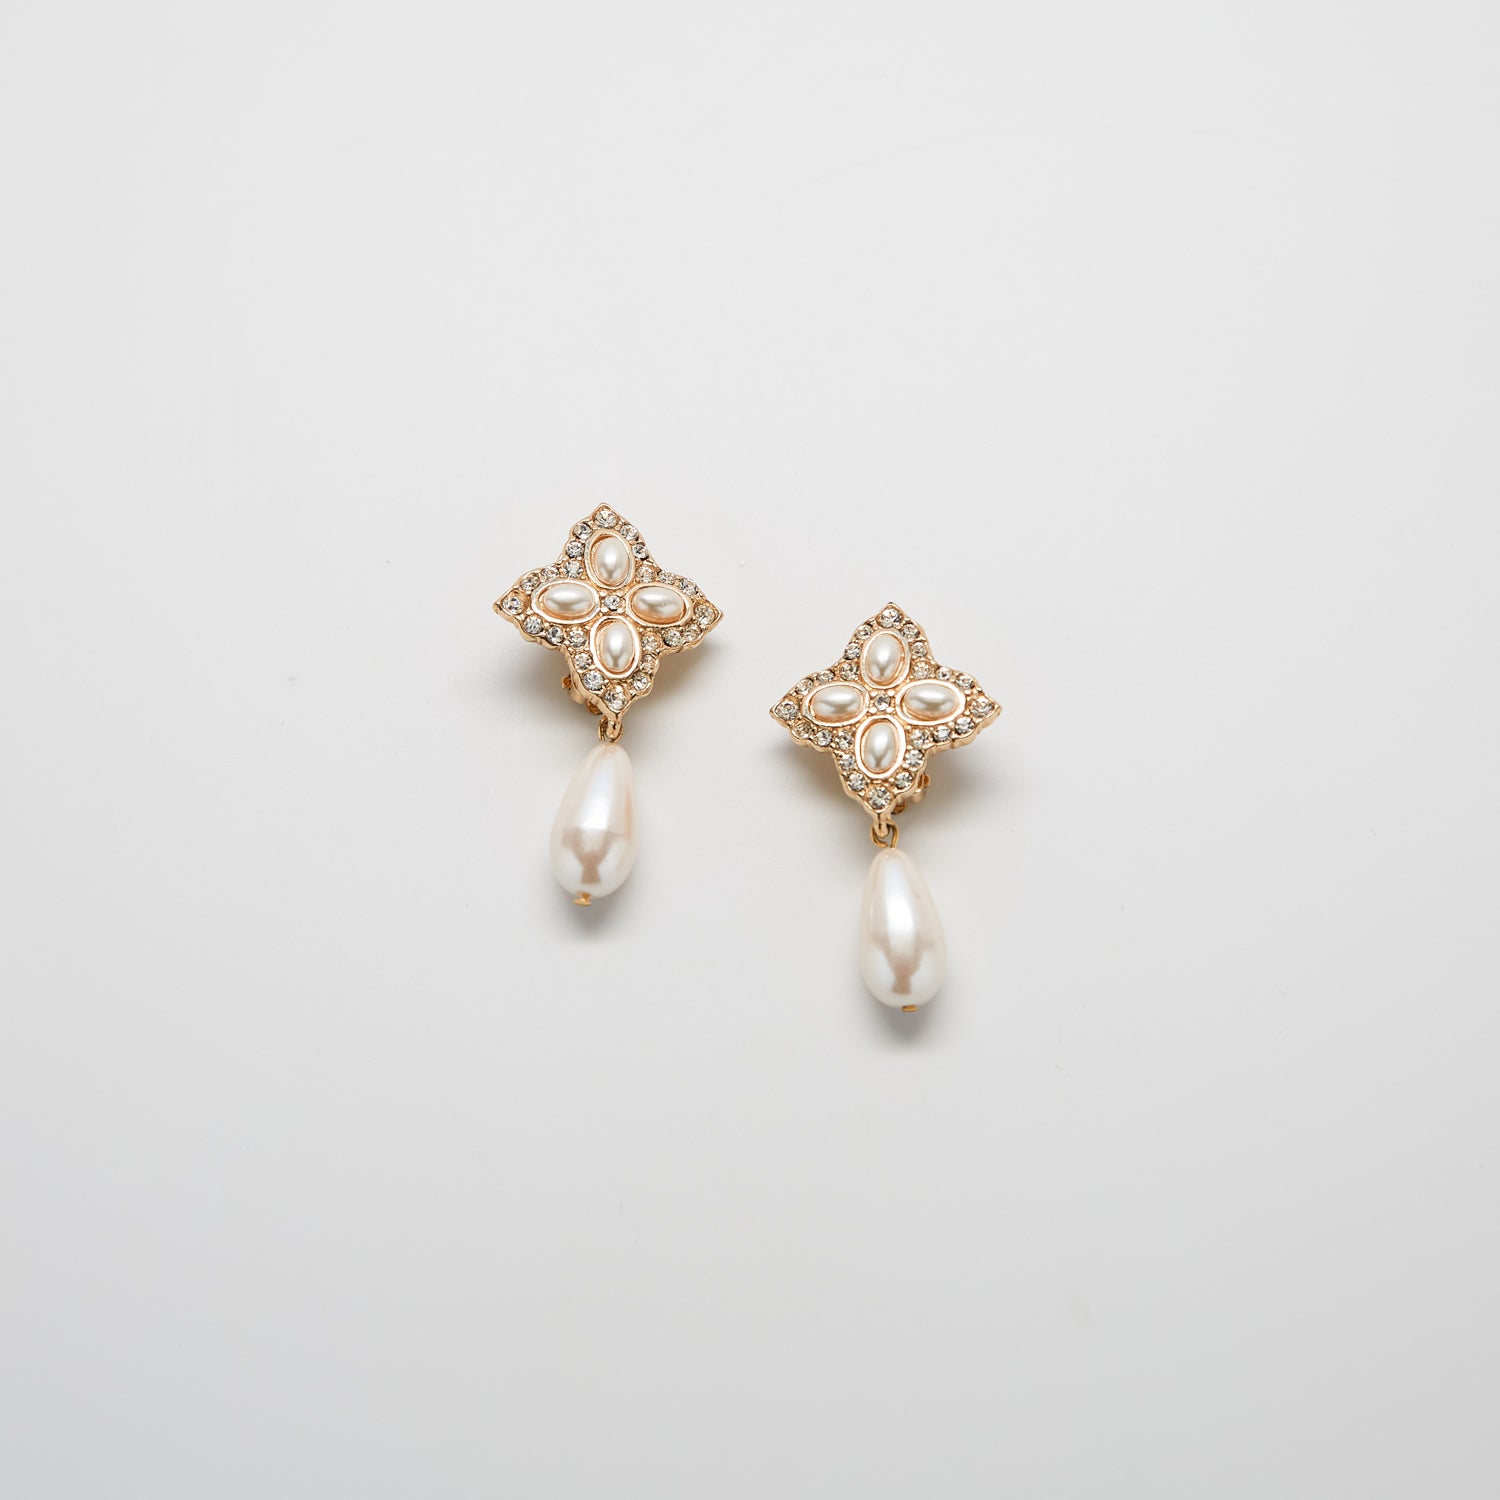 Vintage Gold and Pearl Deco Drop Earrings